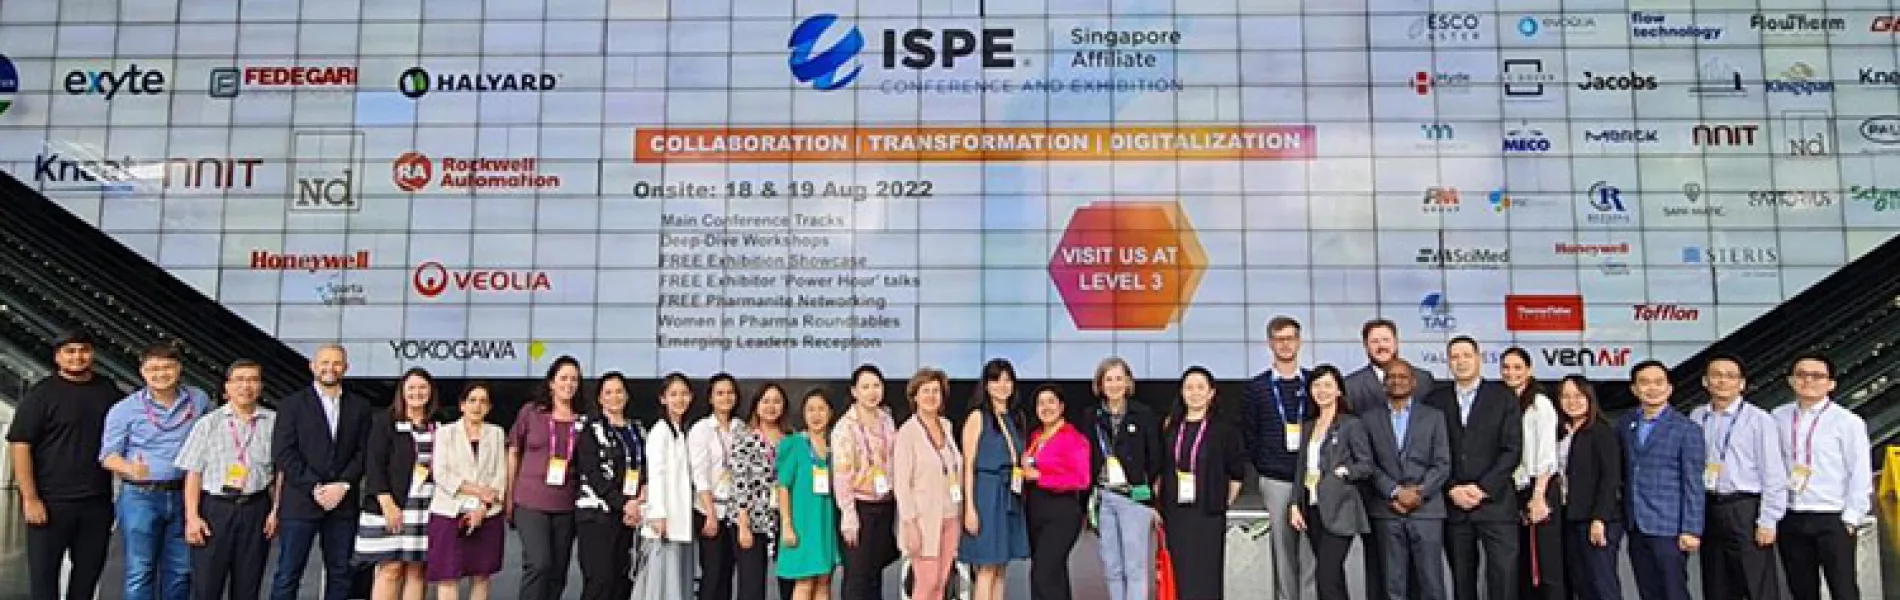 2022 ISPE Singapore Affiliate Conference & Exhibition